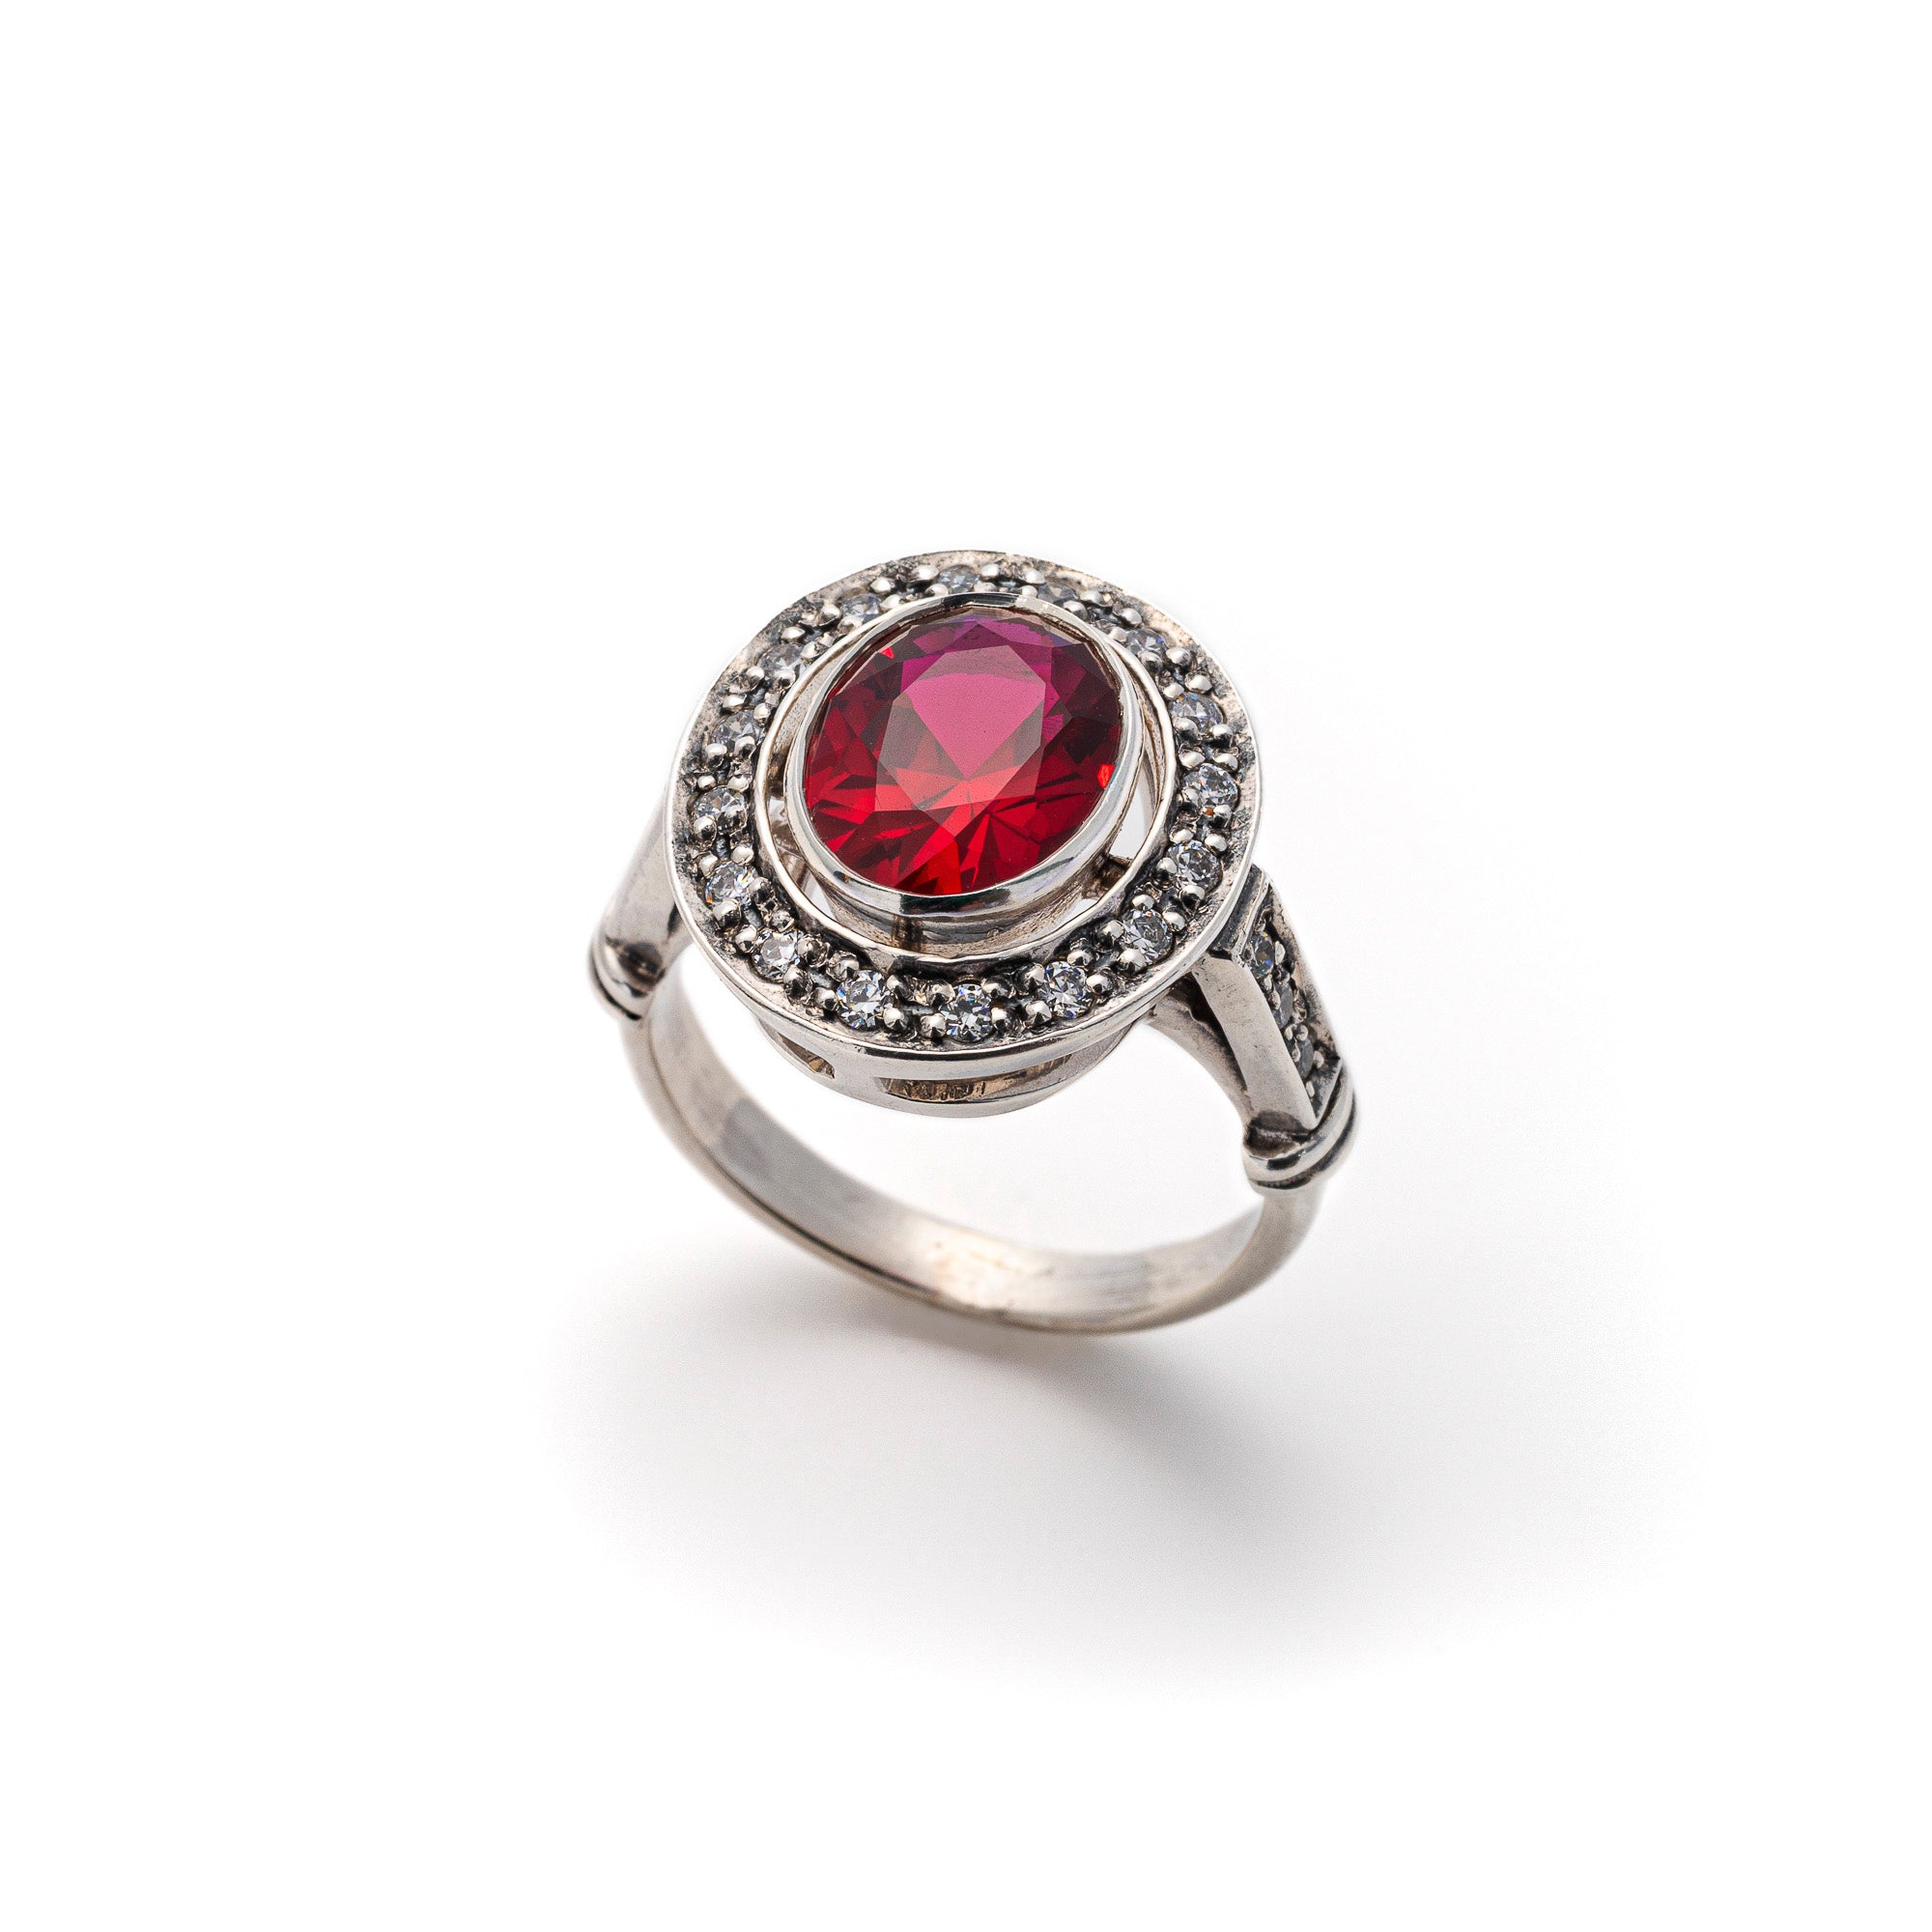 Antique Ruby Ring, Created Ruby, Solid Silver, Statement Vintage Style ...